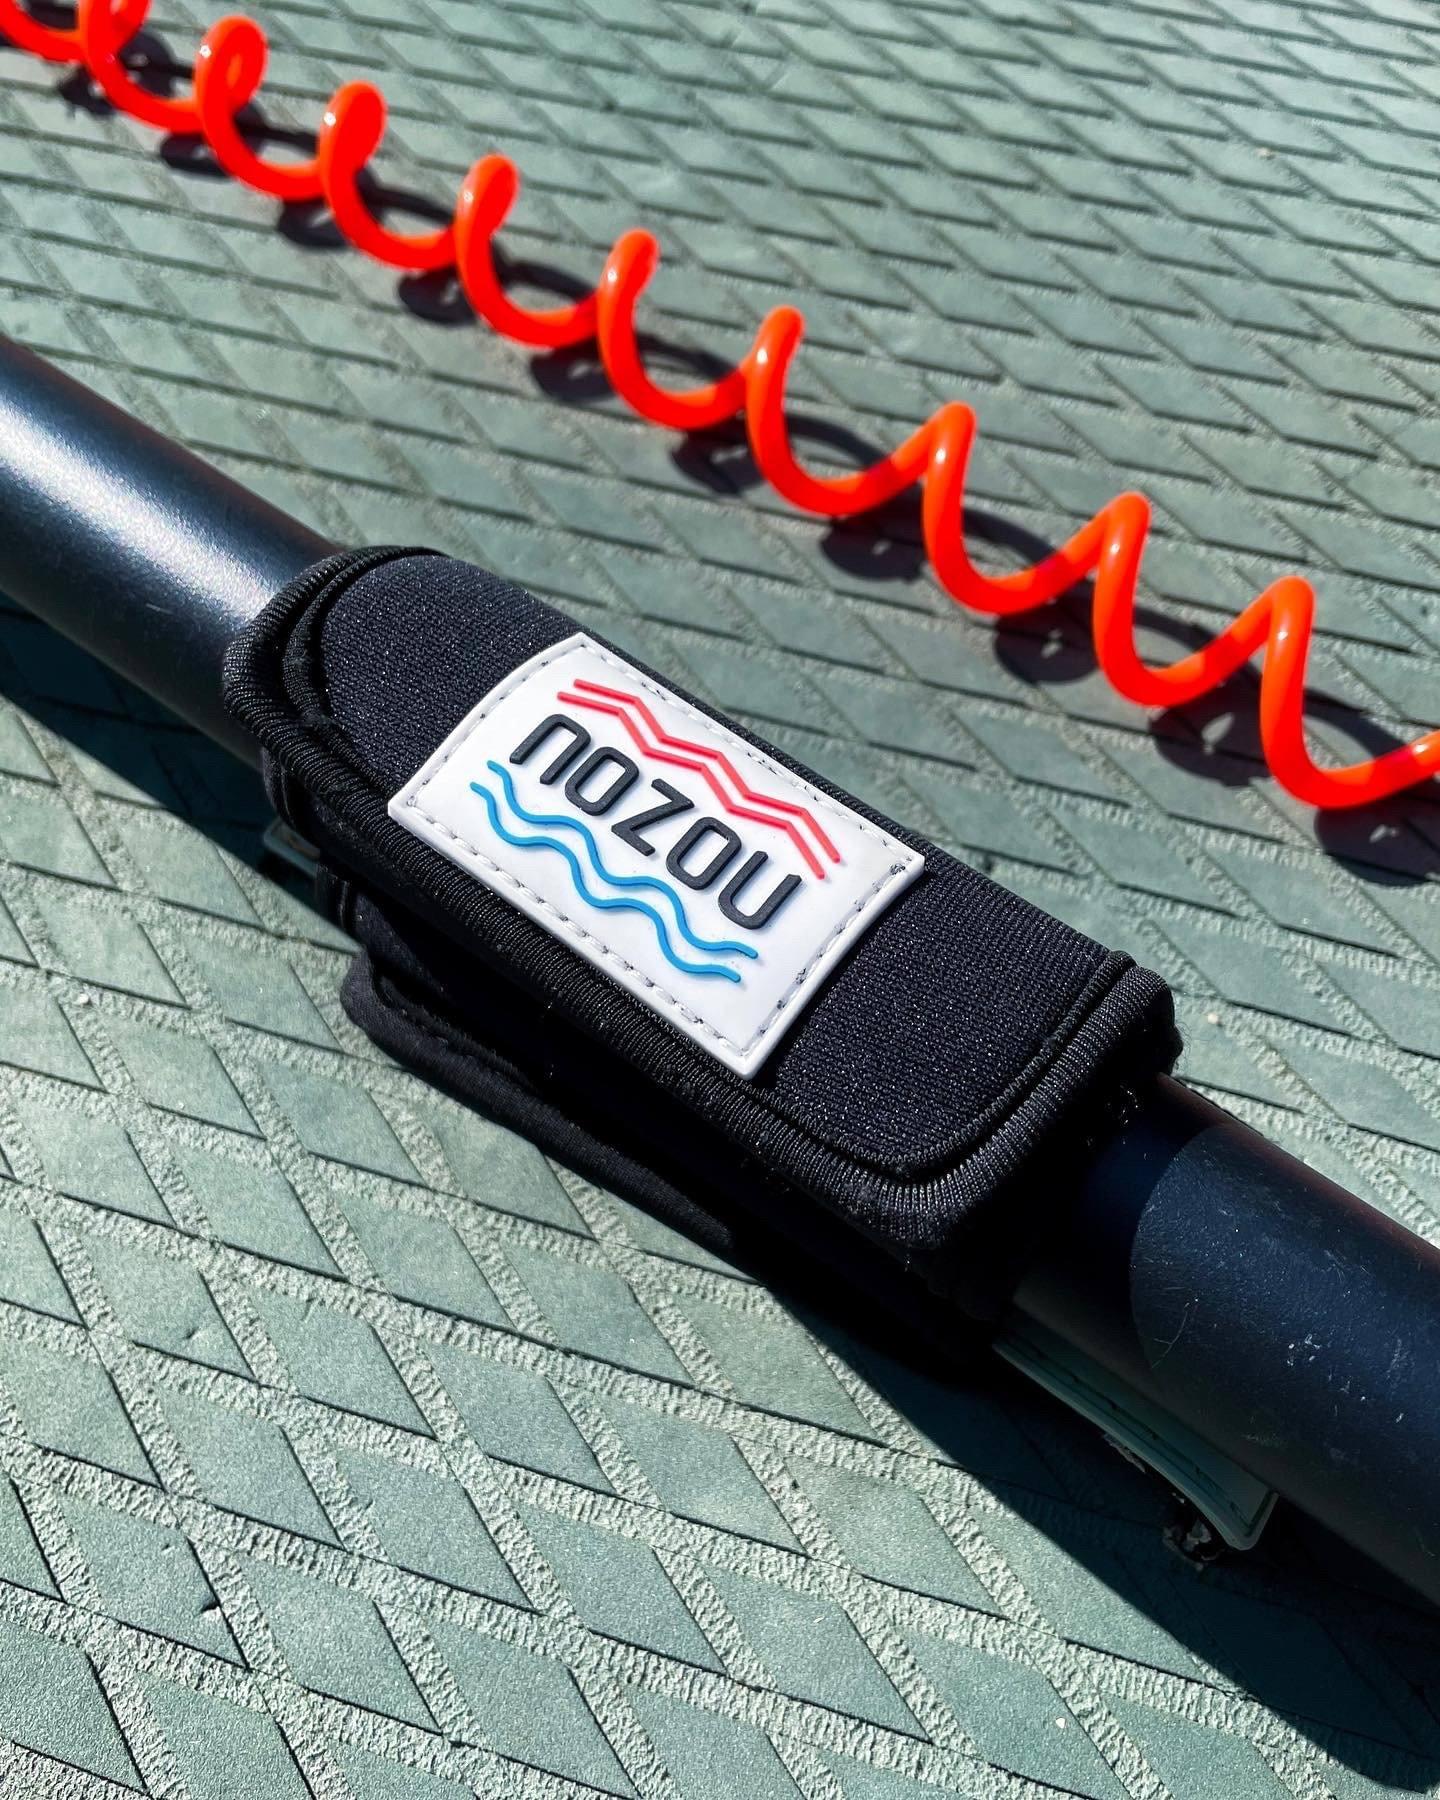 NOZOU Paddle Holder - Non-Slip Grip Fits Securely on Paddle Board Handle